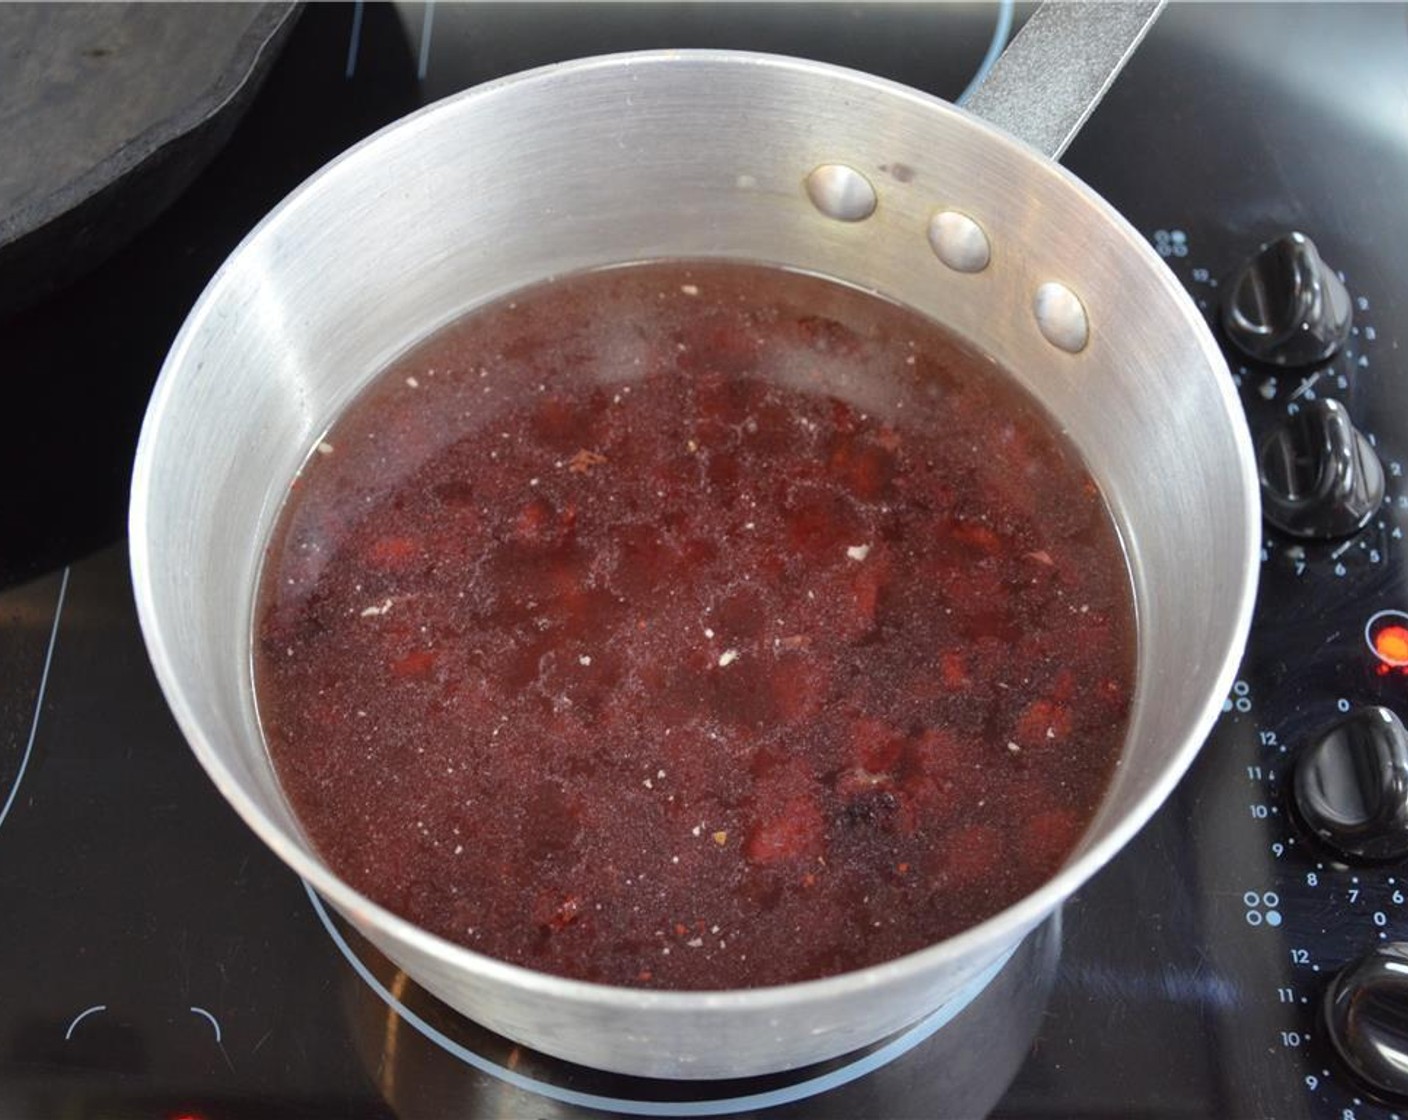 step 1 Soak the Dried Cranberries (4 cups) in Water (4 cups) and Rice Vinegar (2 cups) until they are soft; roughly 20-30 minutes.